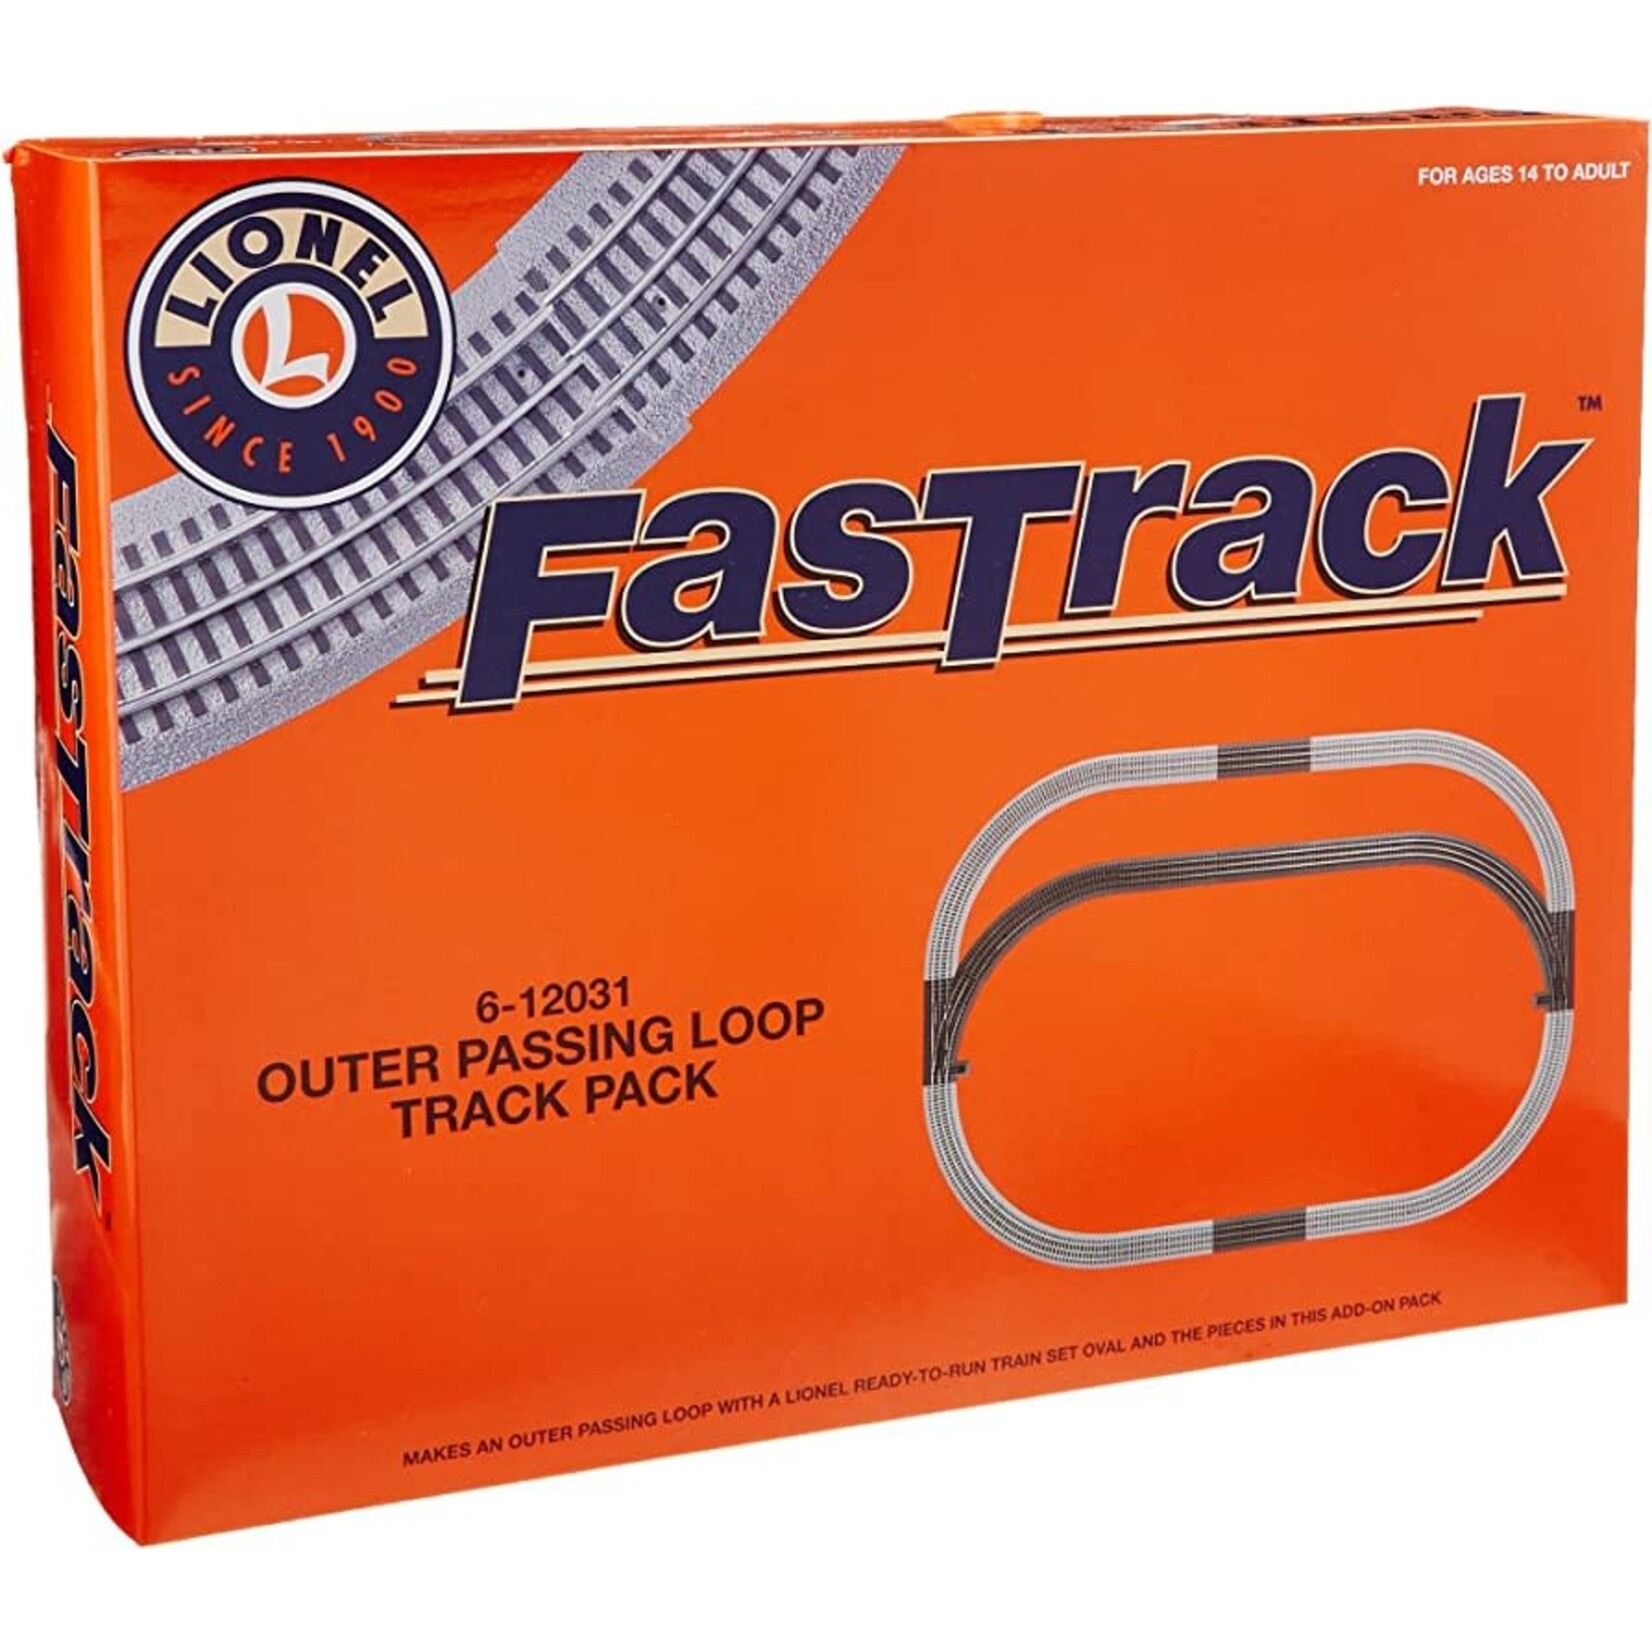 Lionel 612031 O FasTrack Outer Passing Loop Add On Pack